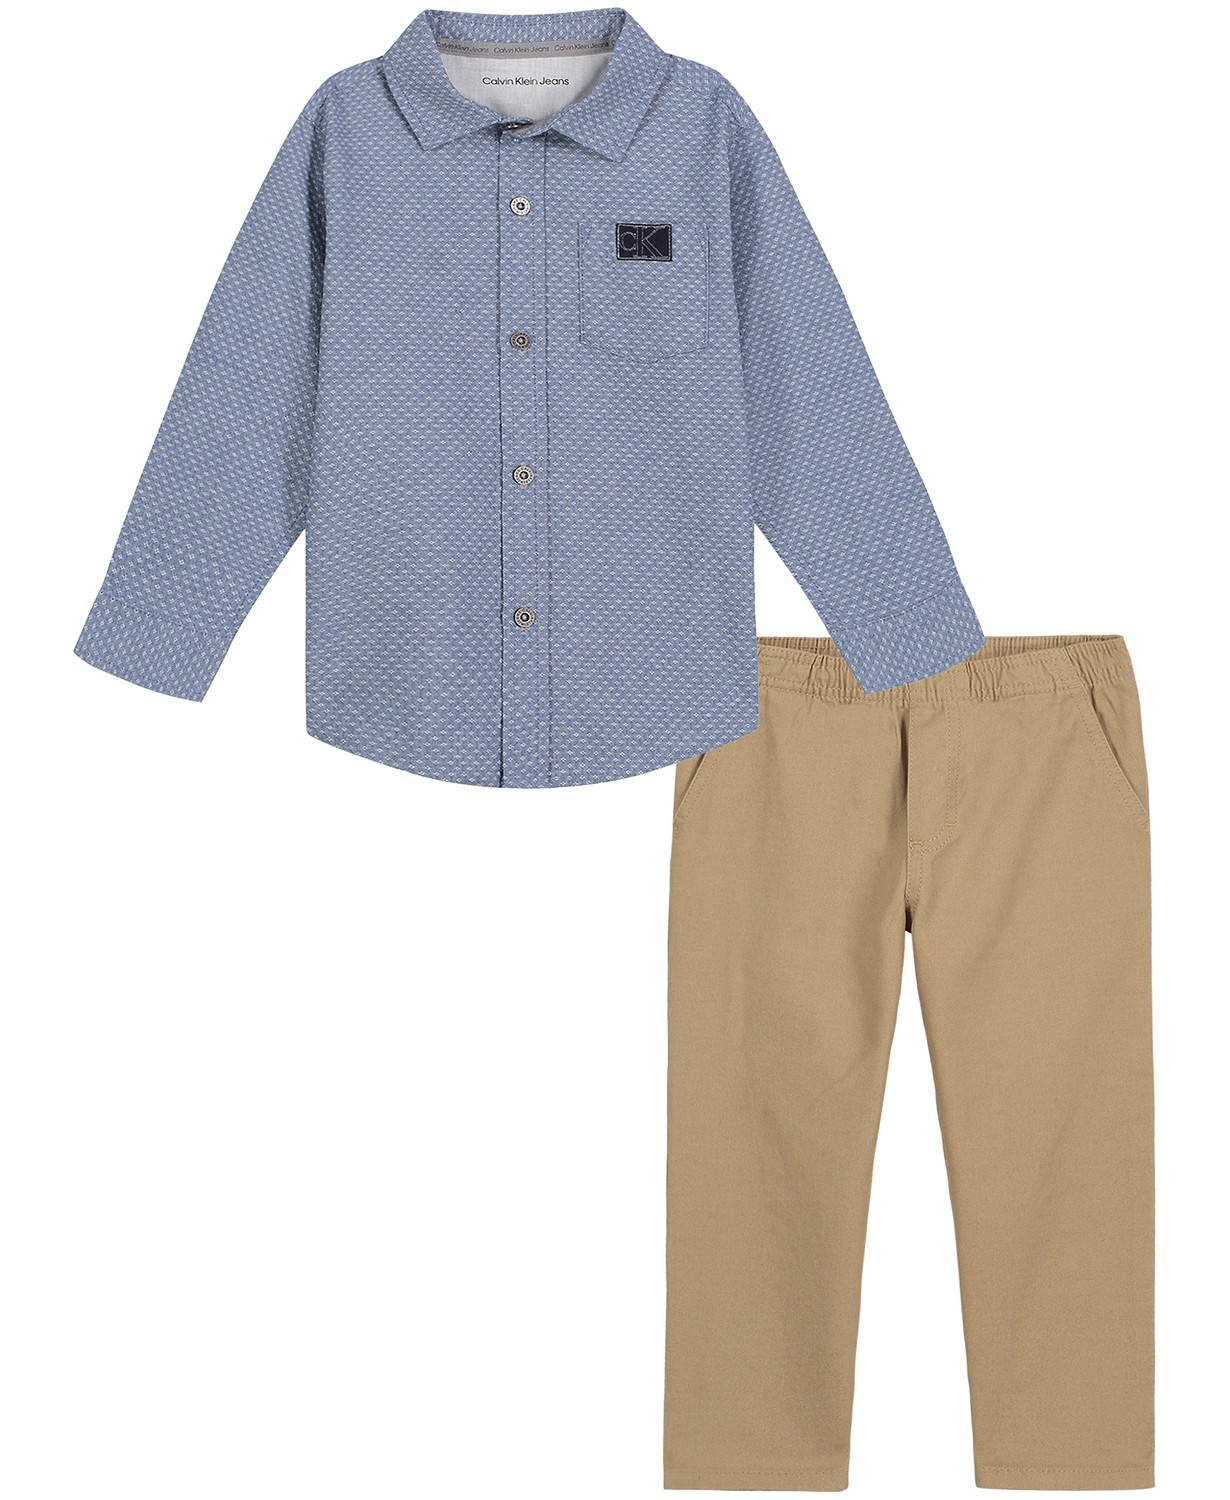 Little Boys Denim Long Sleeve Button-Front Shirt and Prewashed Twill Pants 2 Piece Set